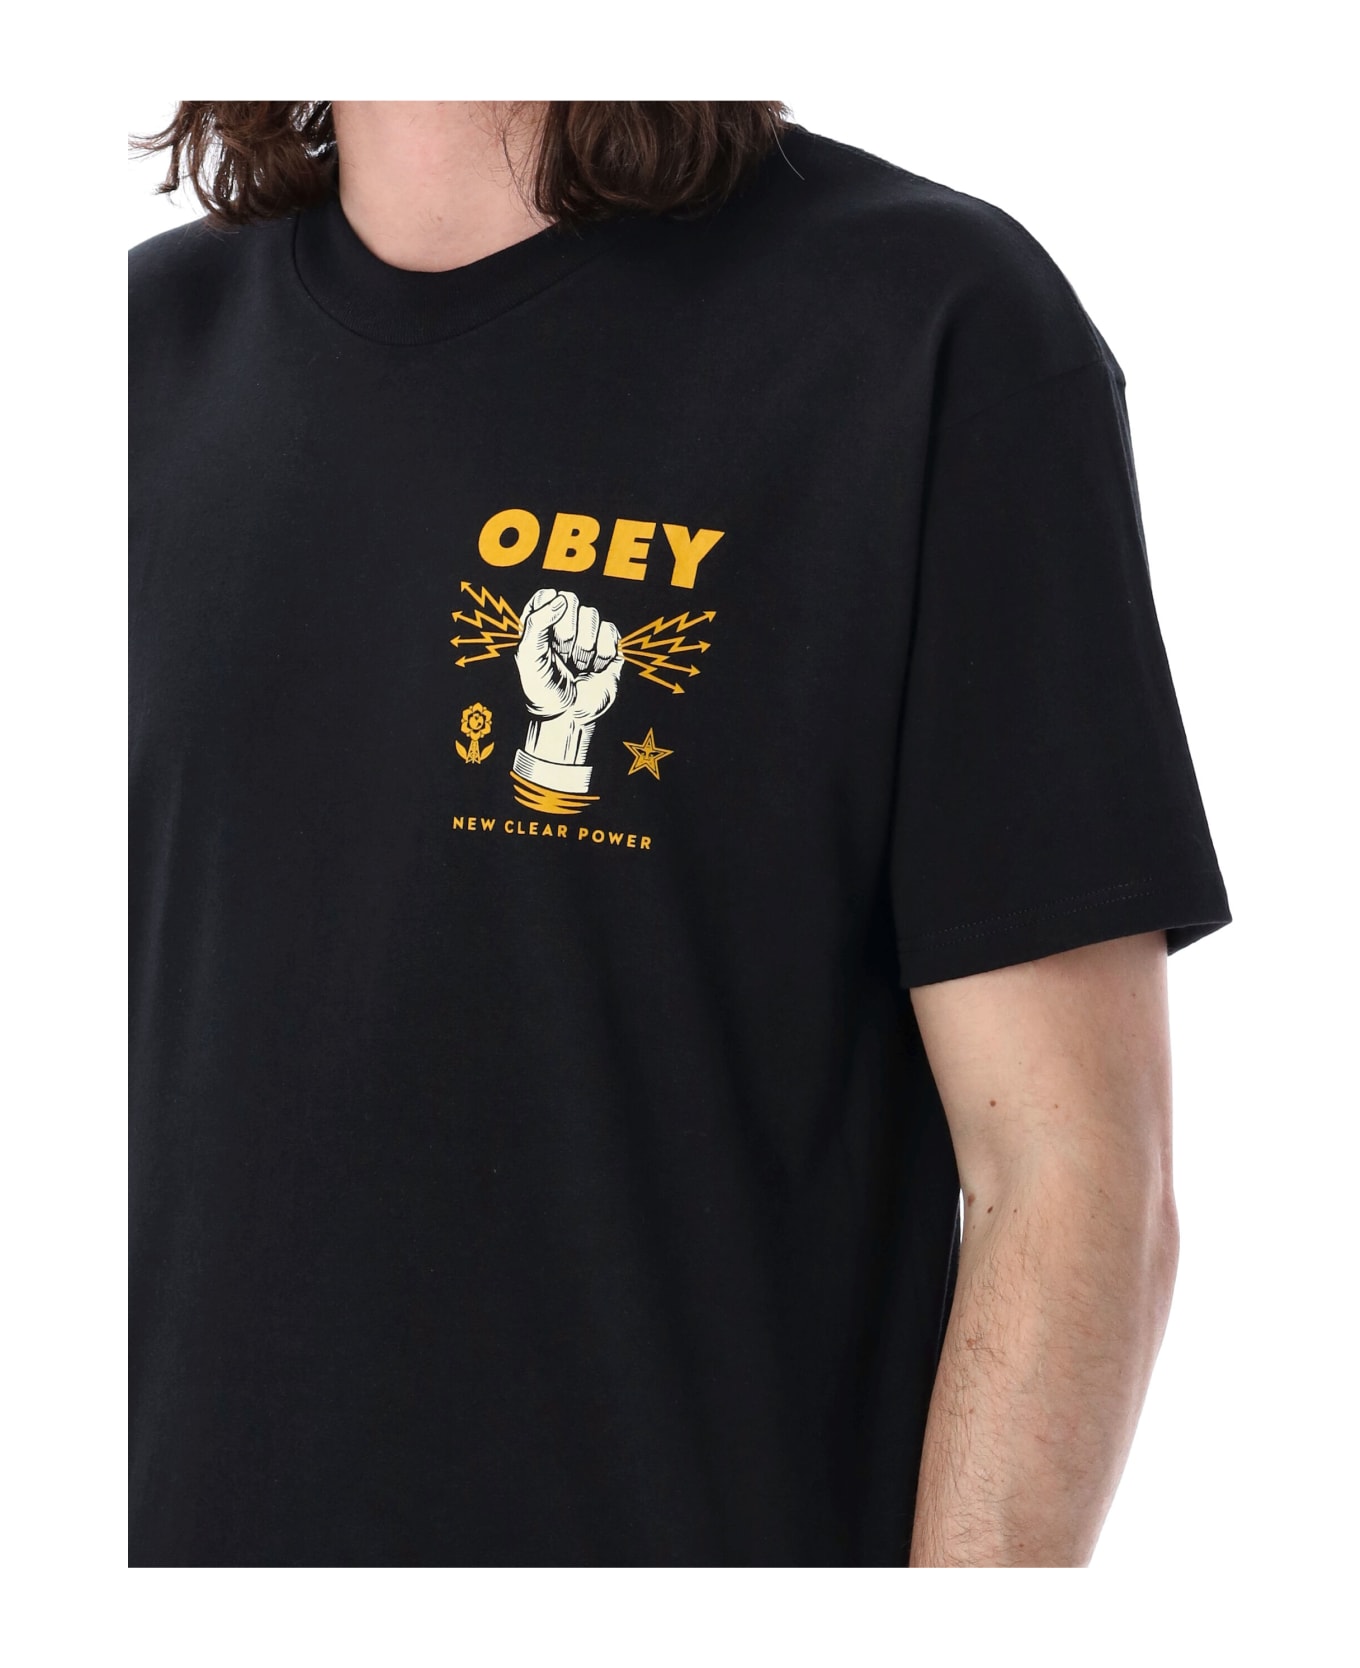 Obey New Clear Power T-shirt - BLACK シャツ